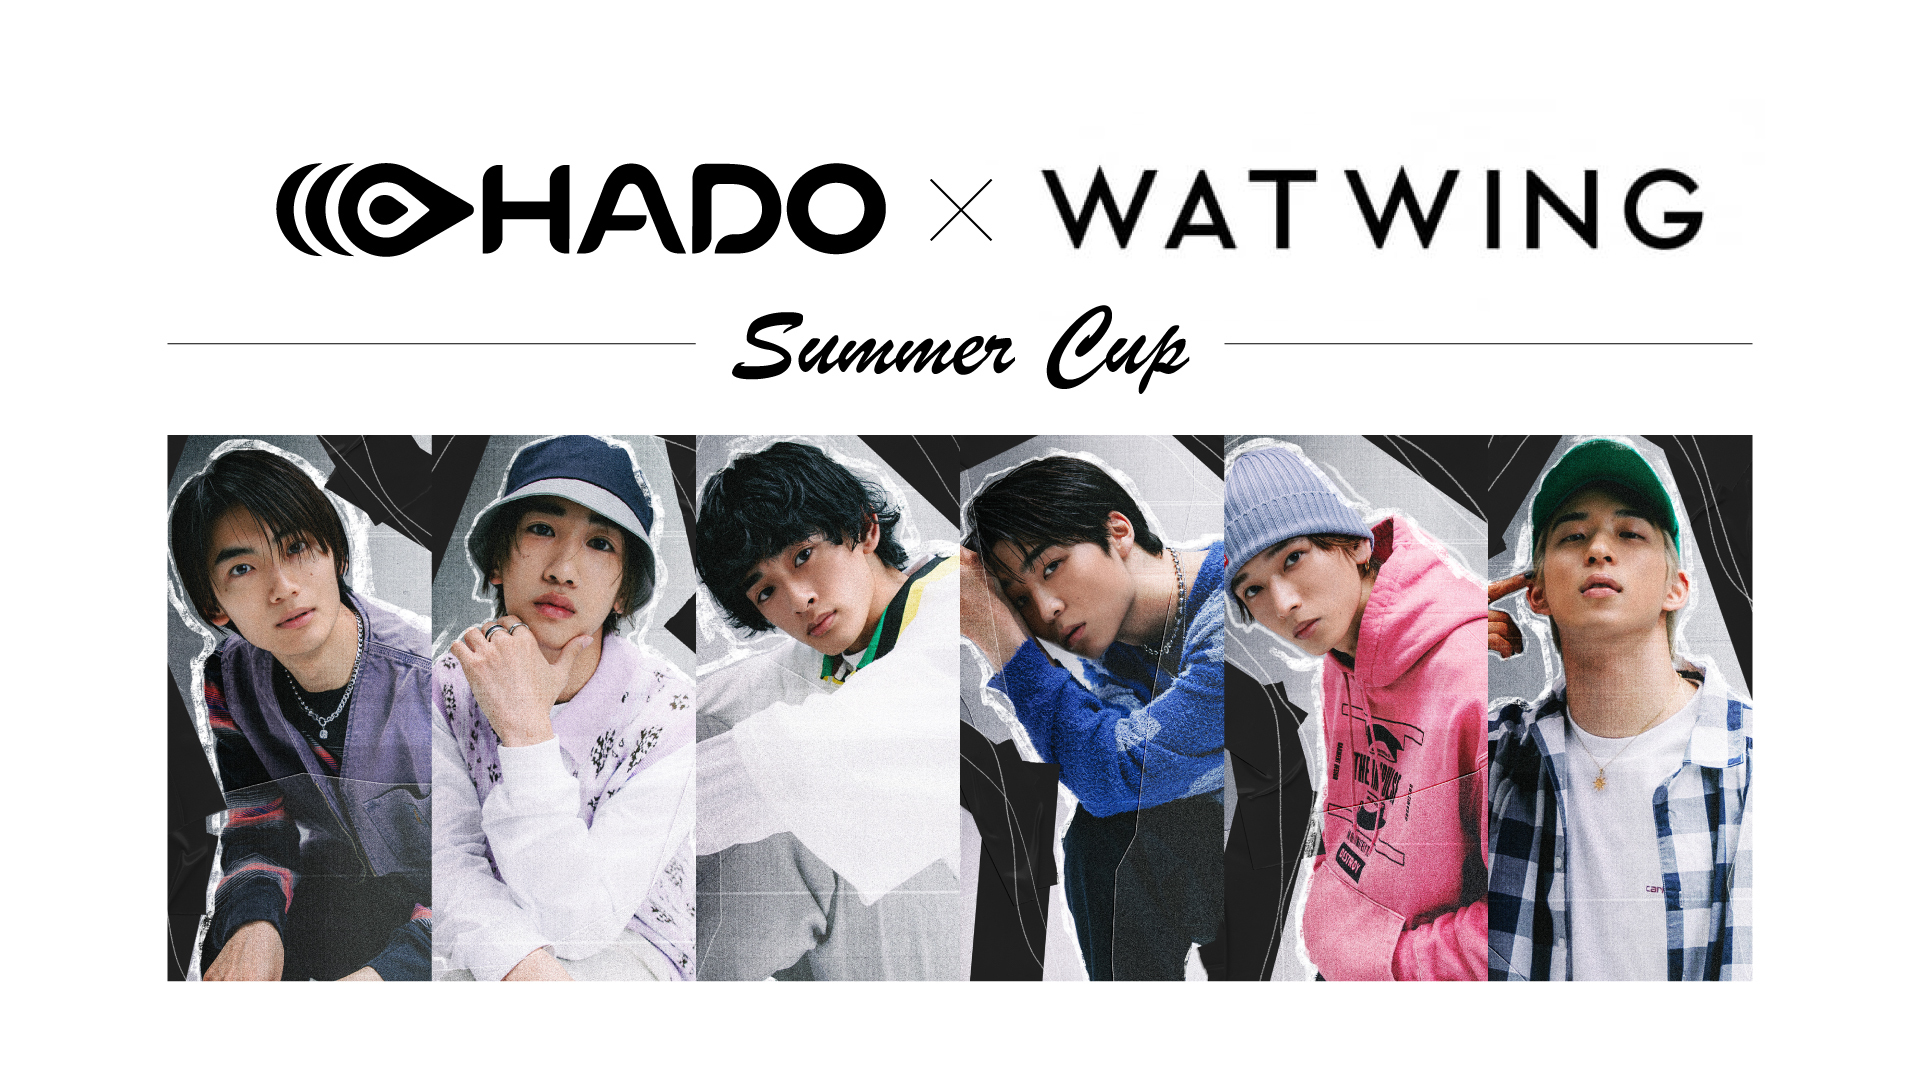 8 1 Hado Watwing Summer Cup 自己紹介rap Song Watw Ing 披露決定 Watwing Official Site